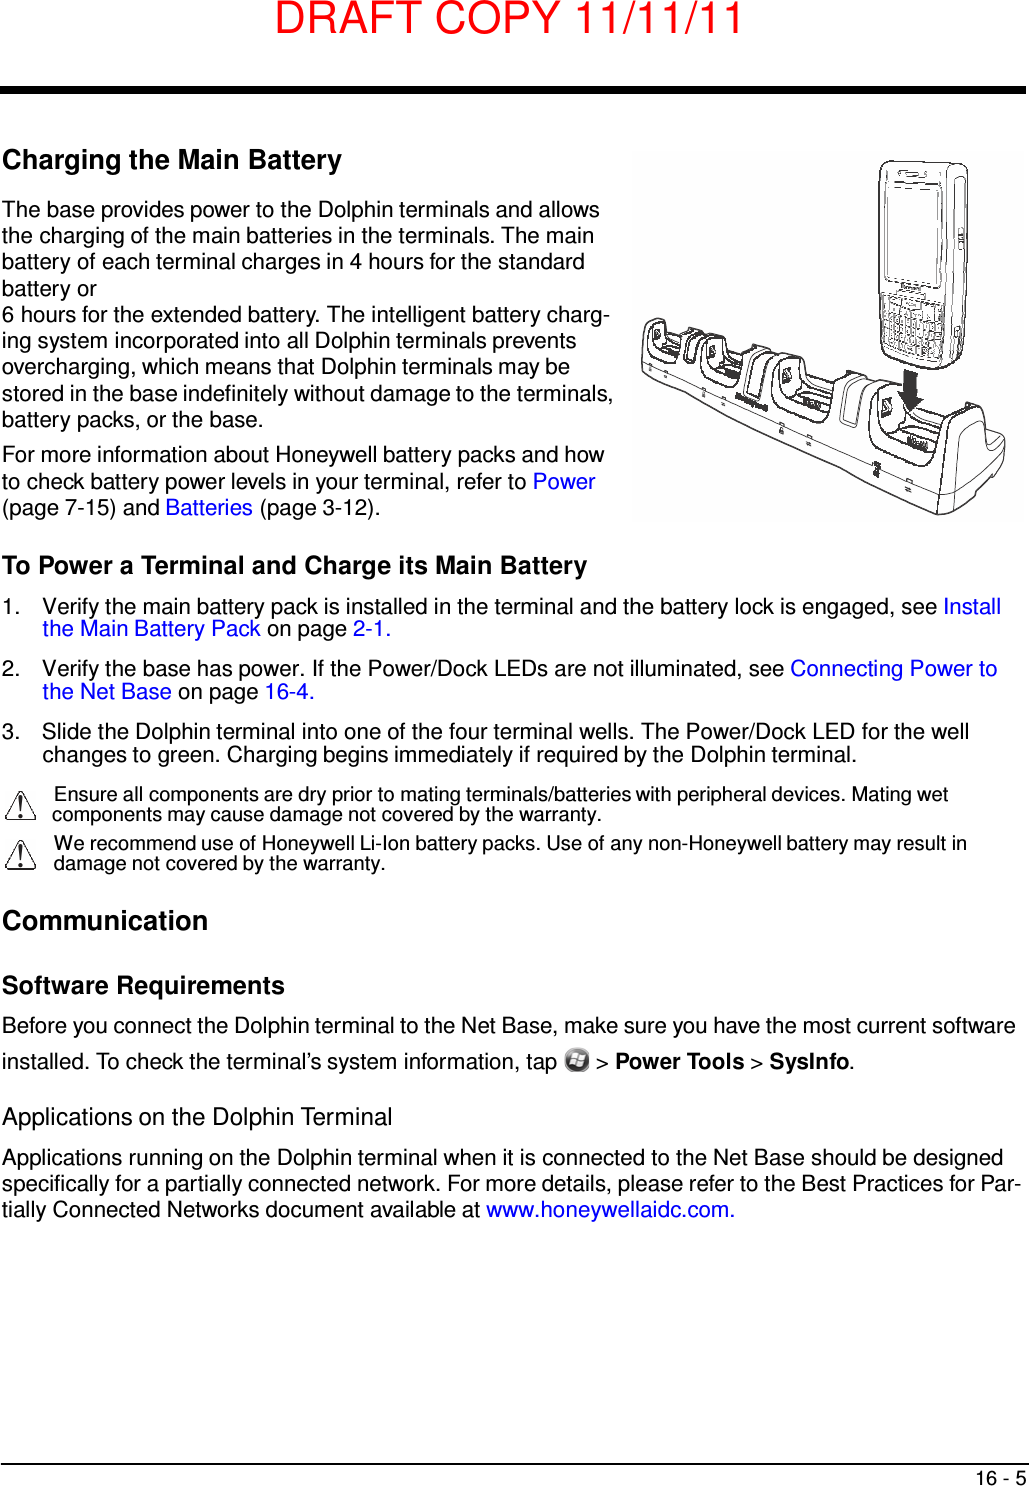 DRAFT COPY 11/11/11 16 - 5       Charging the Main Battery  The base provides power to the Dolphin terminals and allows the charging of the main batteries in the terminals. The main battery of each terminal charges in 4 hours for the standard battery or 6 hours for the extended battery. The intelligent battery charg- ing system incorporated into all Dolphin terminals prevents overcharging, which means that Dolphin terminals may be stored in the base indefinitely without damage to the terminals, battery packs, or the base. For more information about Honeywell battery packs and how to check battery power levels in your terminal, refer to Power (page 7-15) and Batteries (page 3-12).  To Power a Terminal and Charge its Main Battery  1.  Verify the main battery pack is installed in the terminal and the battery lock is engaged, see Install the Main Battery Pack on page 2-1.  2.  Verify the base has power. If the Power/Dock LEDs are not illuminated, see Connecting Power to the Net Base on page 16-4.  3.  Slide the Dolphin terminal into one of the four terminal wells. The Power/Dock LED for the well changes to green. Charging begins immediately if required by the Dolphin terminal.  Ensure all components are dry prior to mating terminals/batteries with peripheral devices. Mating wet  components may cause damage not covered by the warranty. We recommend use of Honeywell Li-Ion battery packs. Use of any non-Honeywell battery may result in damage not covered by the warranty.   Communication   Software Requirements  Before you connect the Dolphin terminal to the Net Base, make sure you have the most current software installed. To check the terminal’s system information, tap  &gt; Power Tools &gt; SysInfo.  Applications on the Dolphin Terminal  Applications running on the Dolphin terminal when it is connected to the Net Base should be designed specifically for a partially connected network. For more details, please refer to the Best Practices for Par- tially Connected Networks document available at www.honeywellaidc.com. 